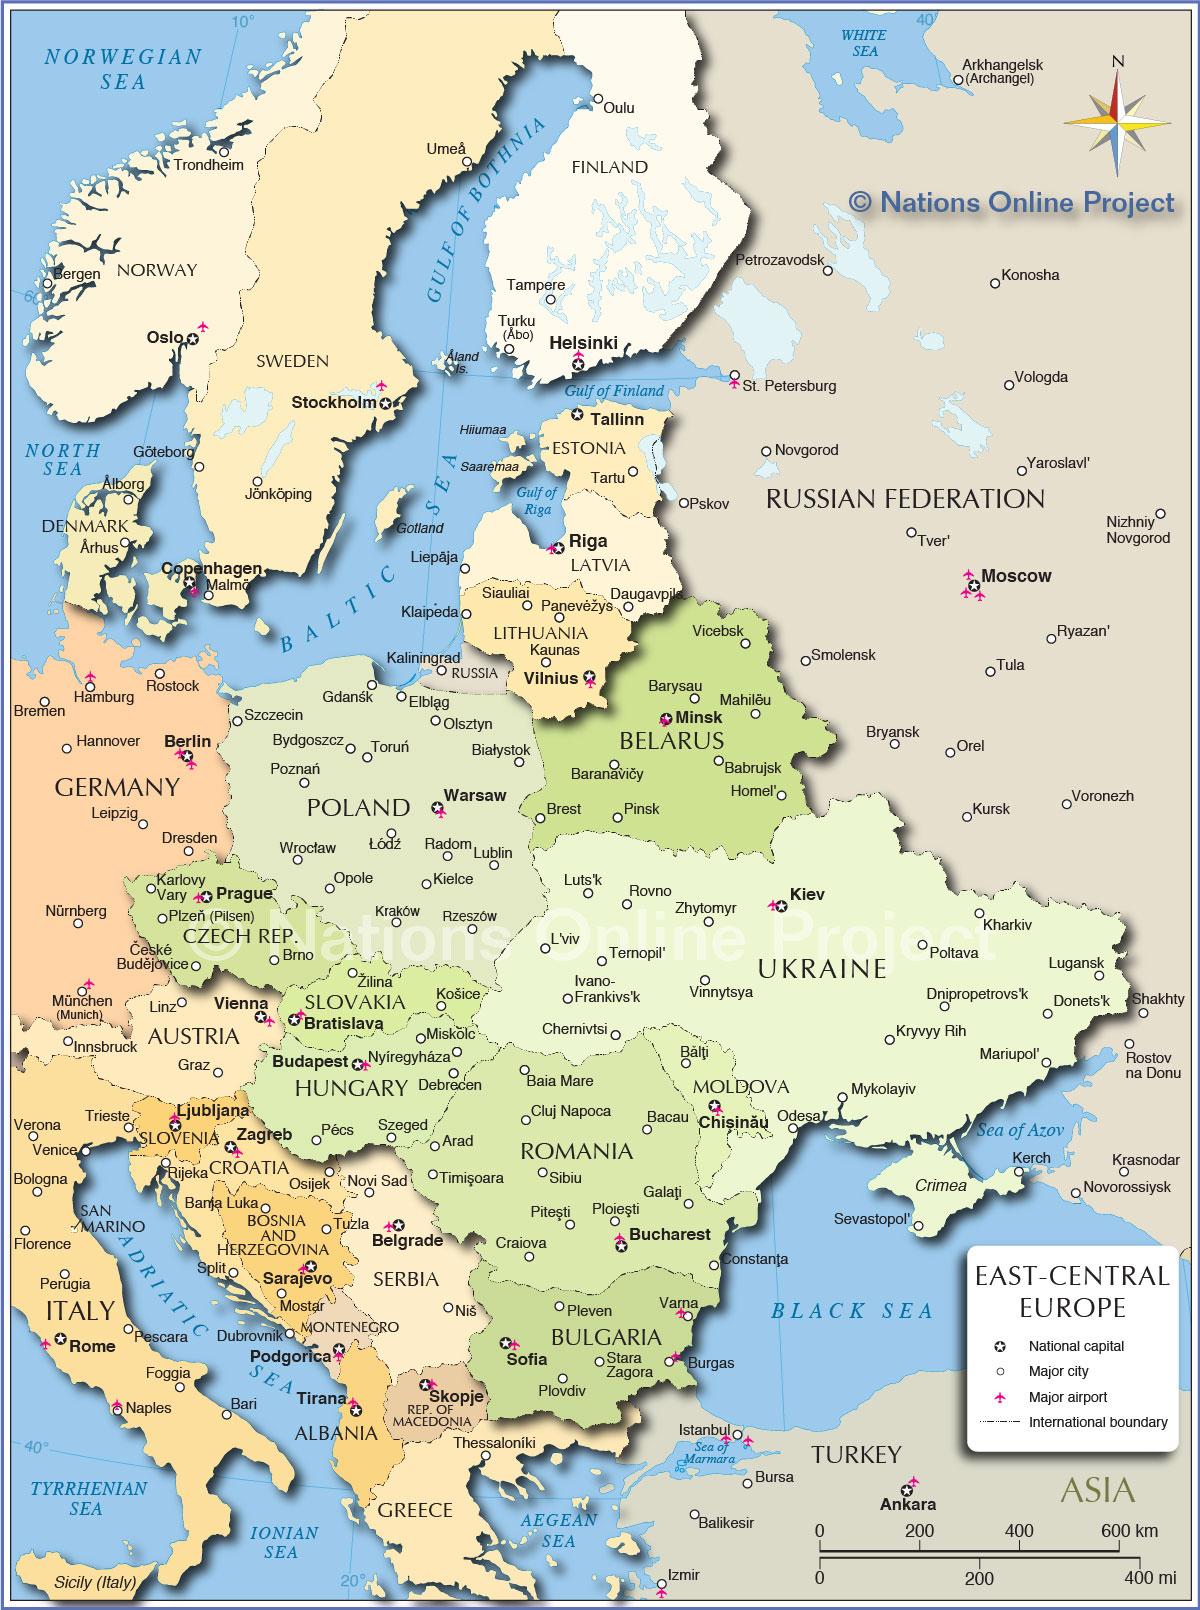 eastern europe and middle east map Political Map Of Central And Eastern Europe Nations Online Project eastern europe and middle east map